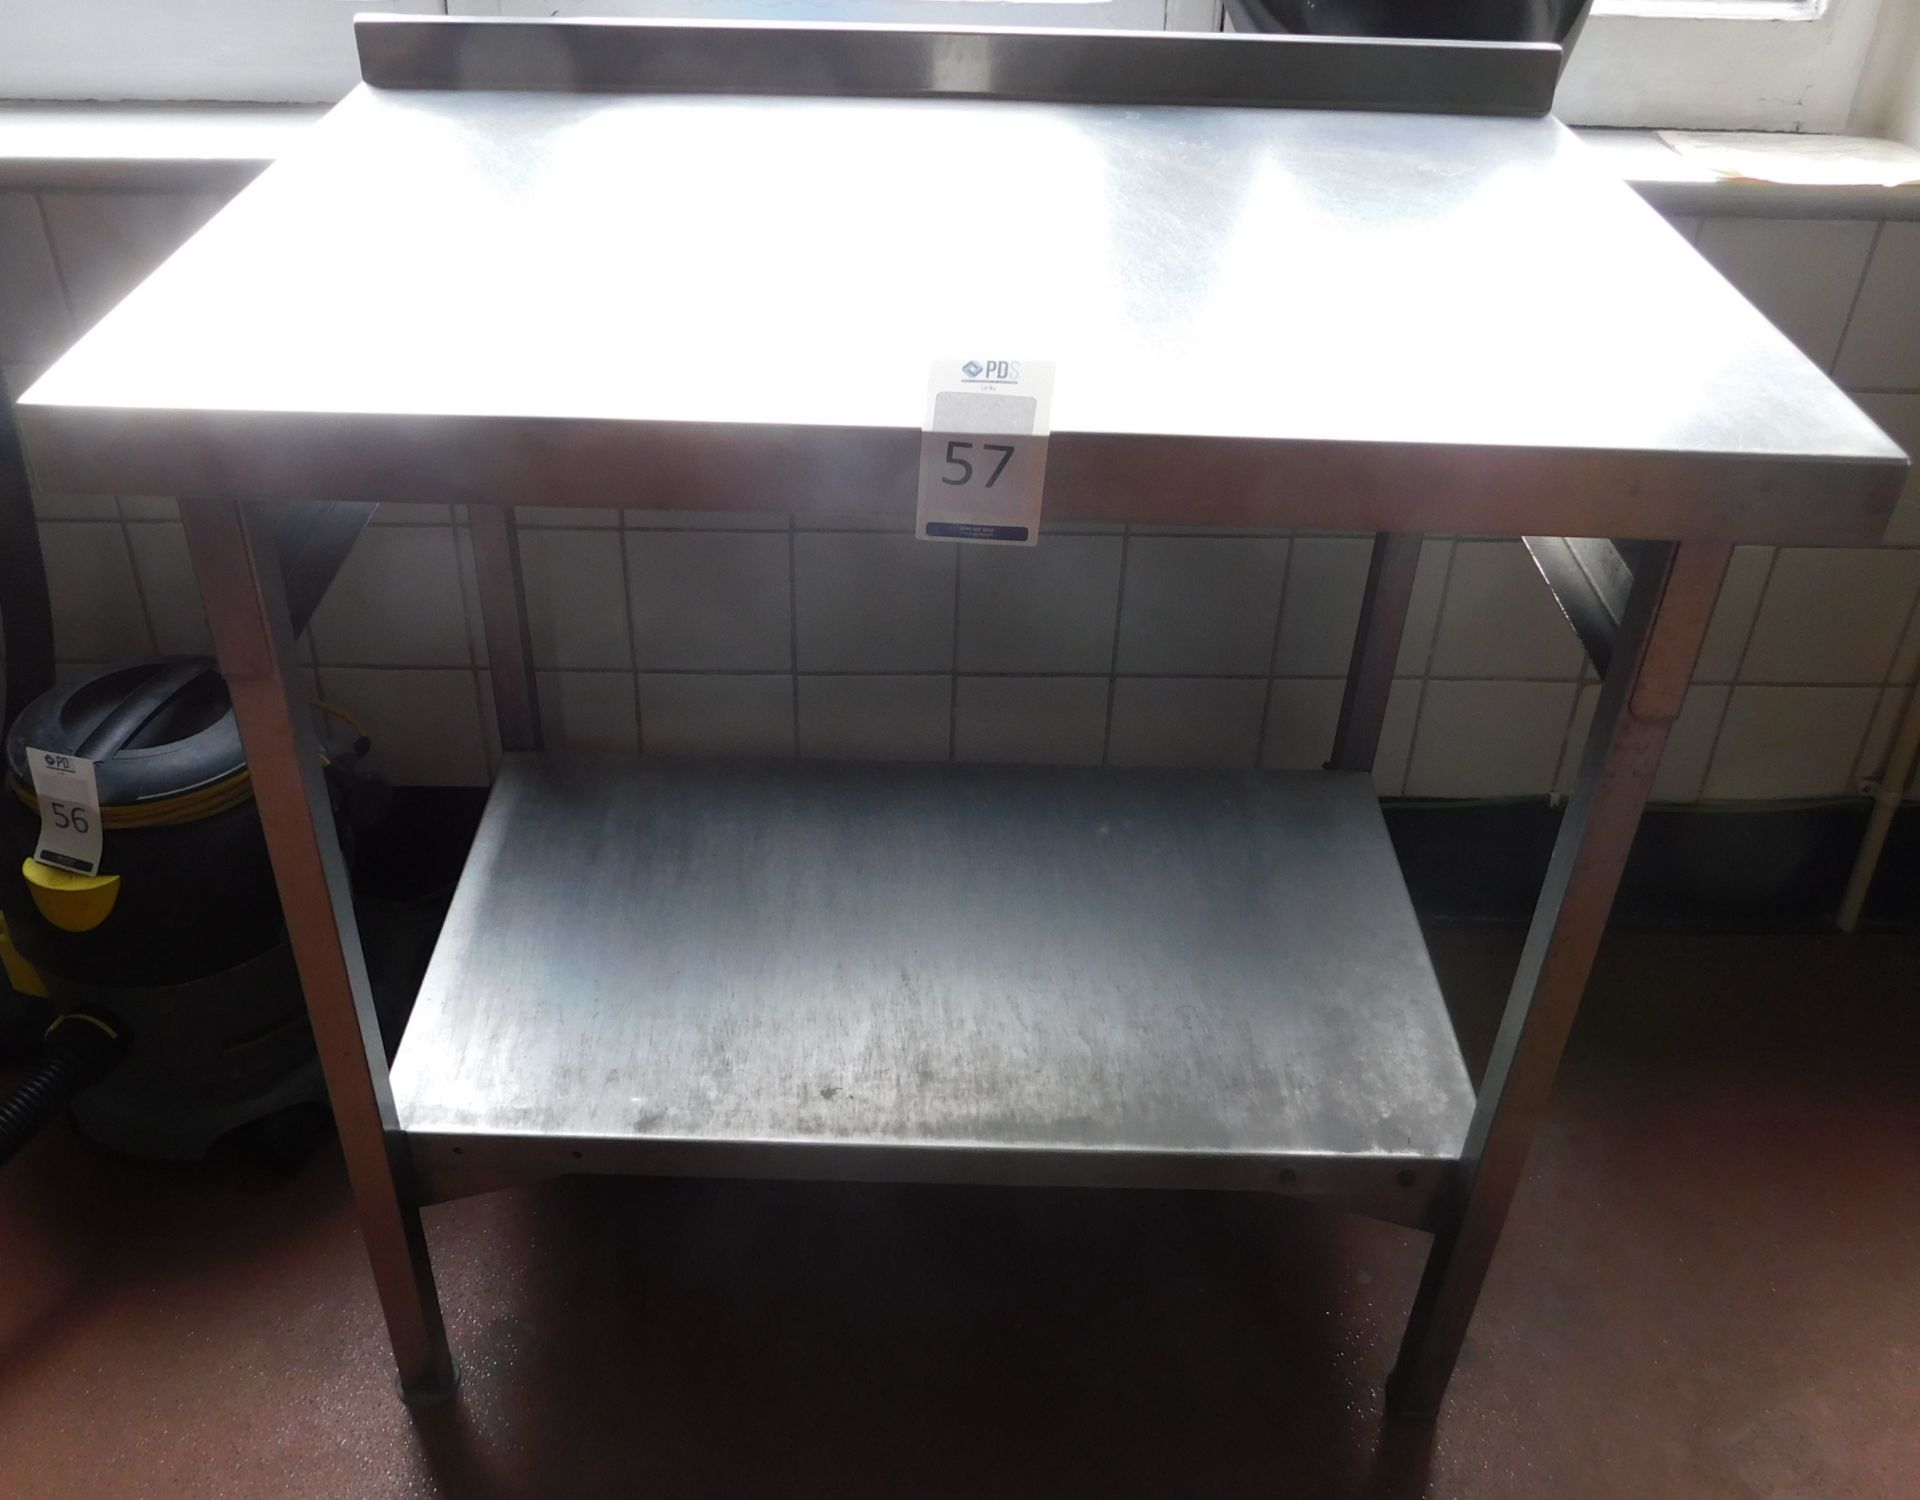 Stainless Steel Preparation Table (Location Bloomsbury - See General Notes for More Details)